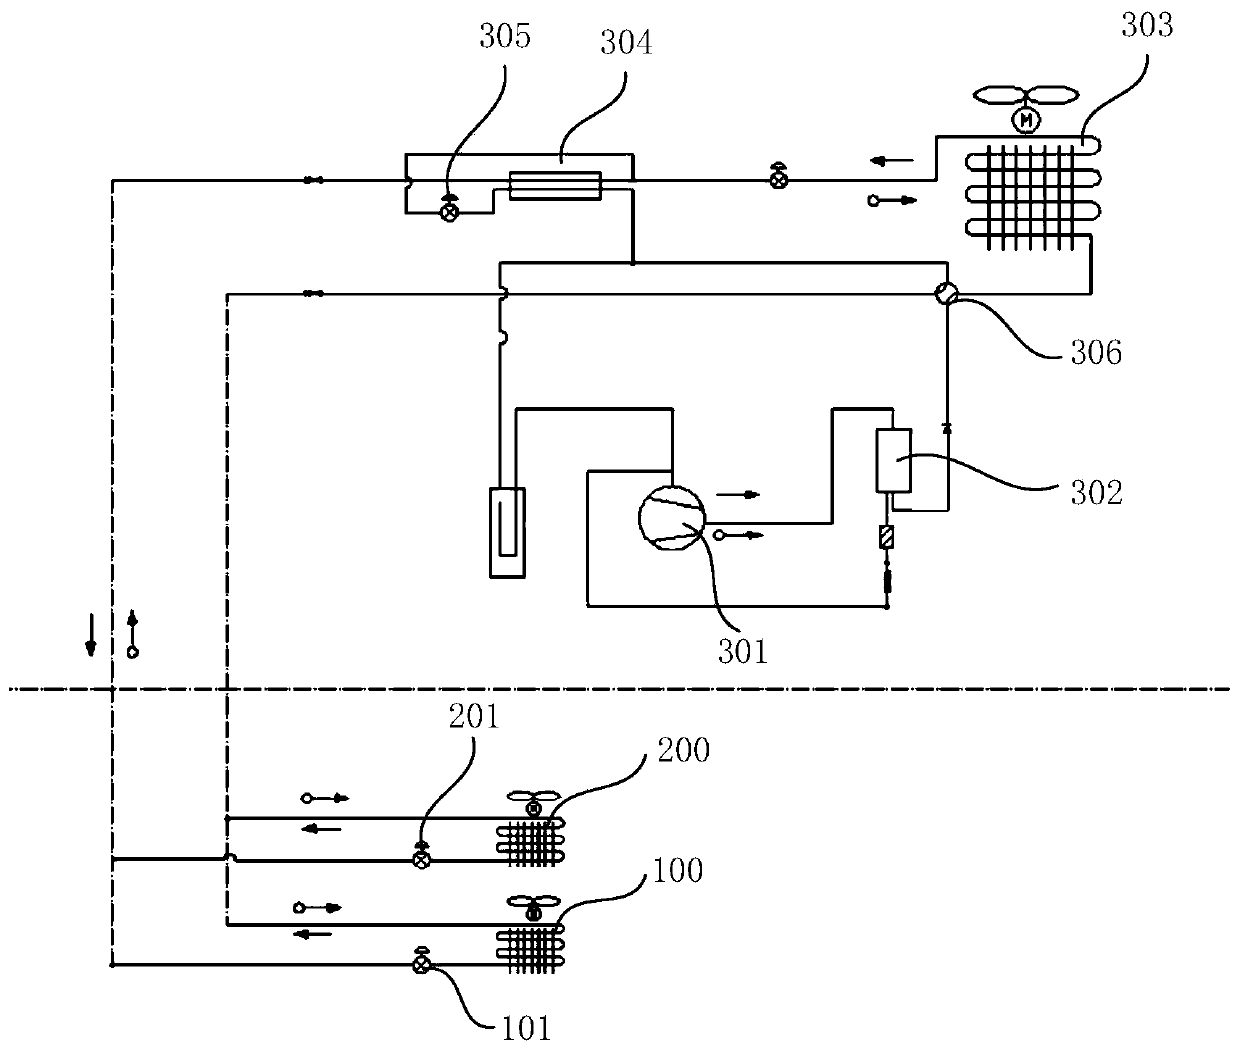 A control method for reducing the noise of an air conditioner indoor unit and a multi-connected air conditioner